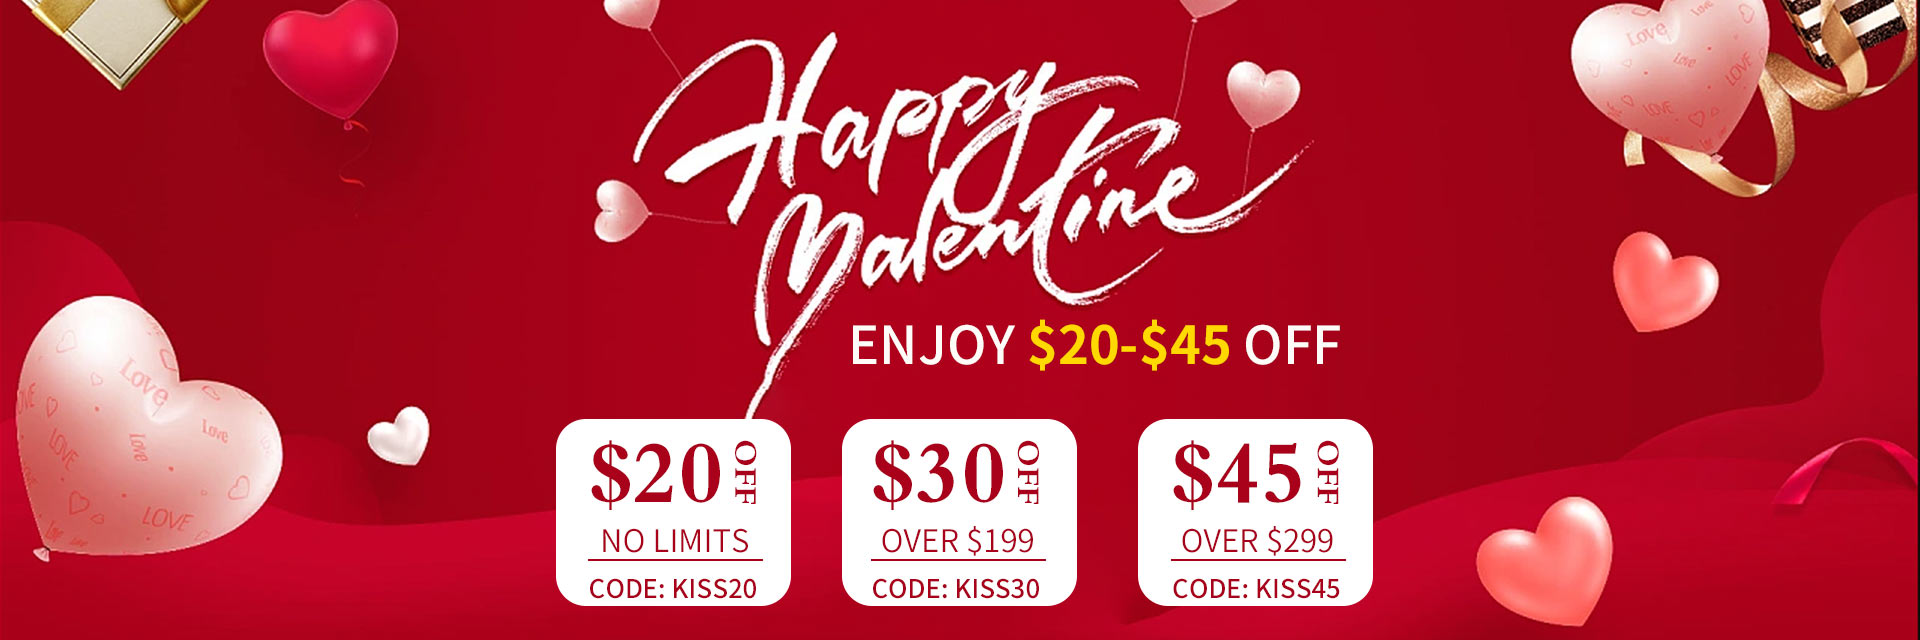 Anicekiss valentine's day human hair wigs big sale: up to $45 off